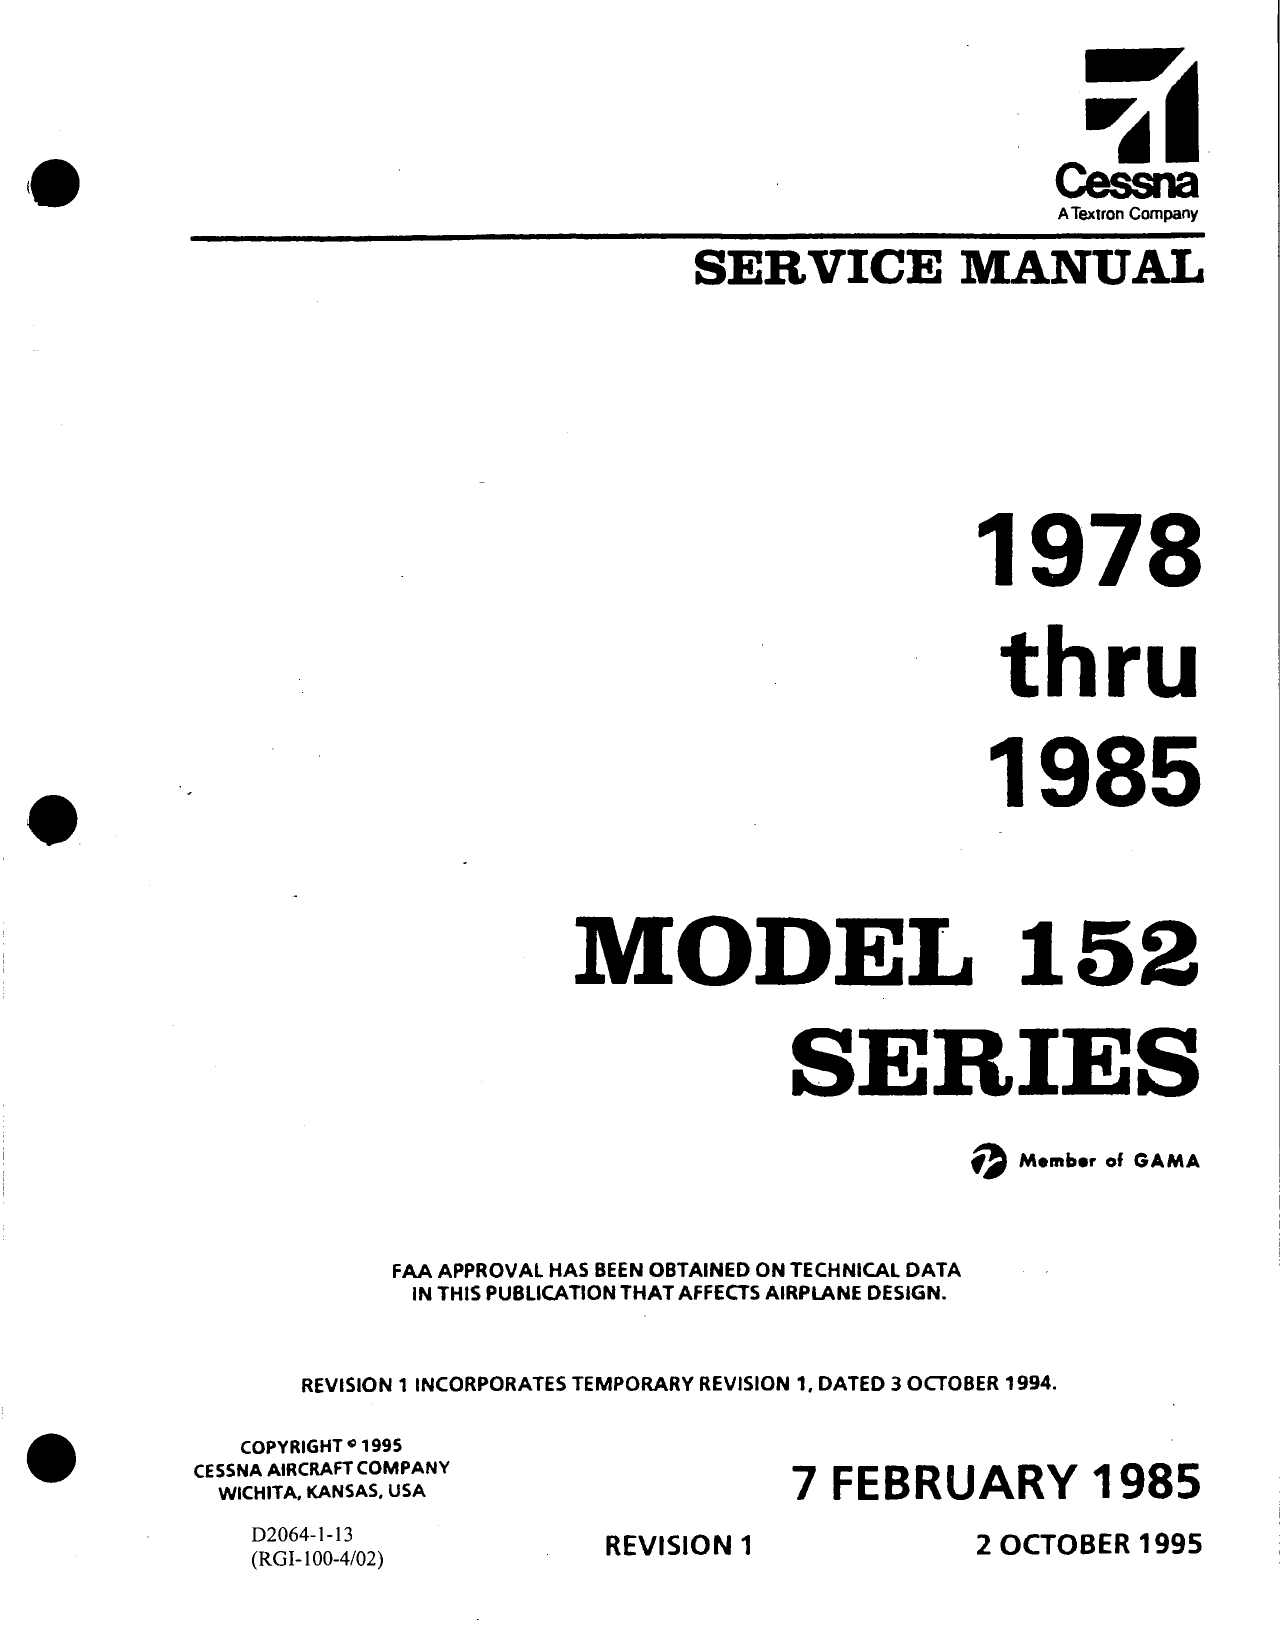 1978-1985 Cessna 152 series aircraft service manual Preview image 1